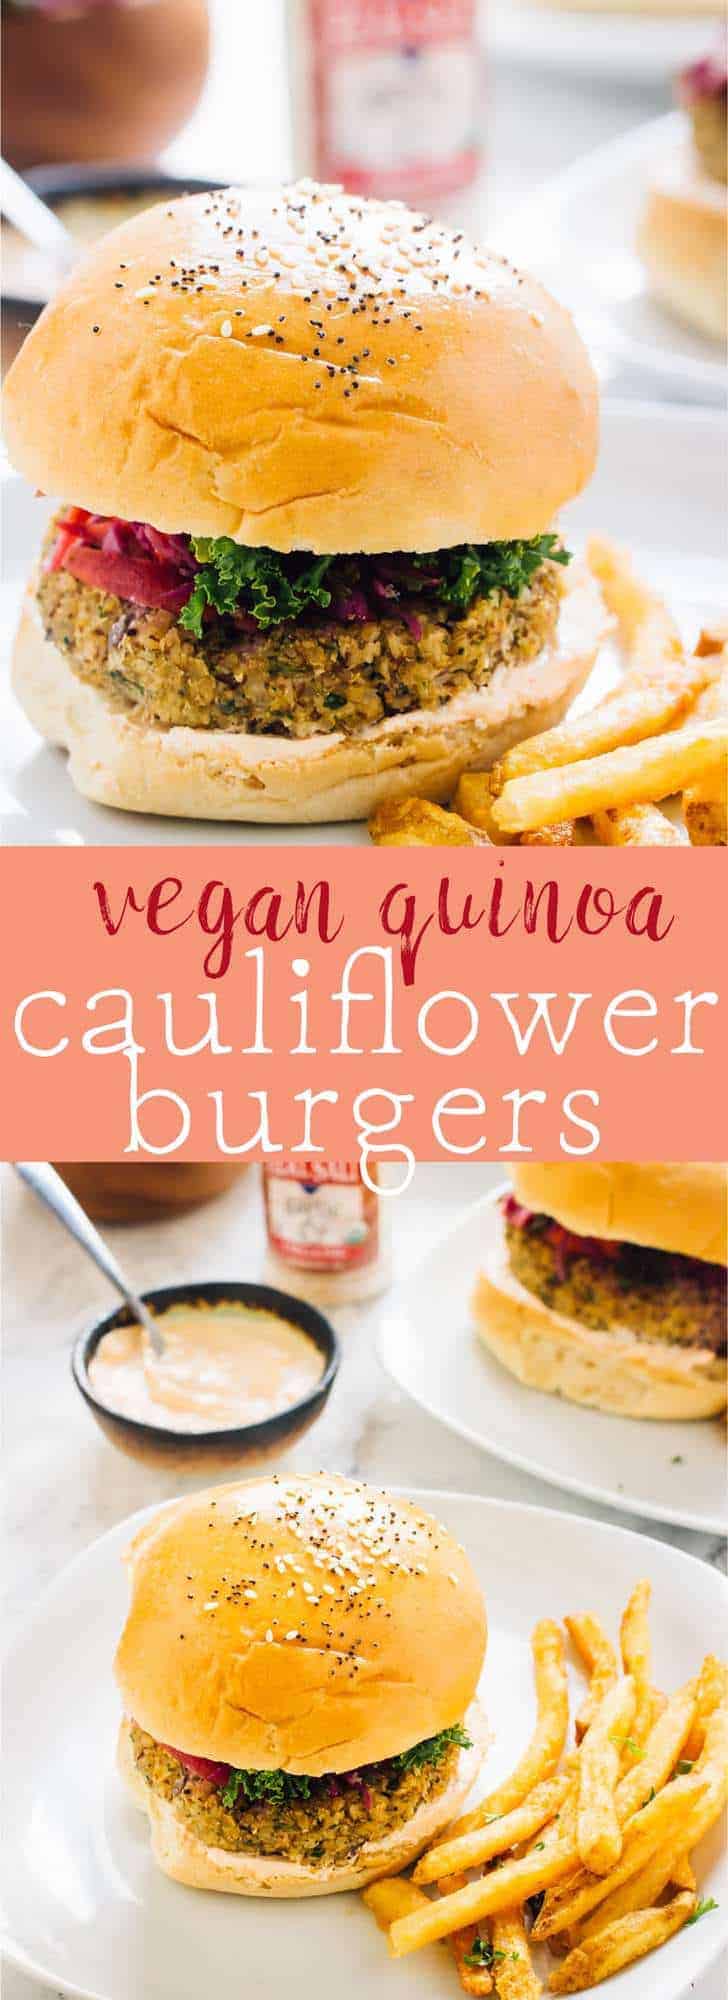 These Vegan Quinoa Cauliflower Burgers have been a HIT every time we make them! They are filling, delicious and so easy to make in large batches! via https://jessicainthekitchen.com